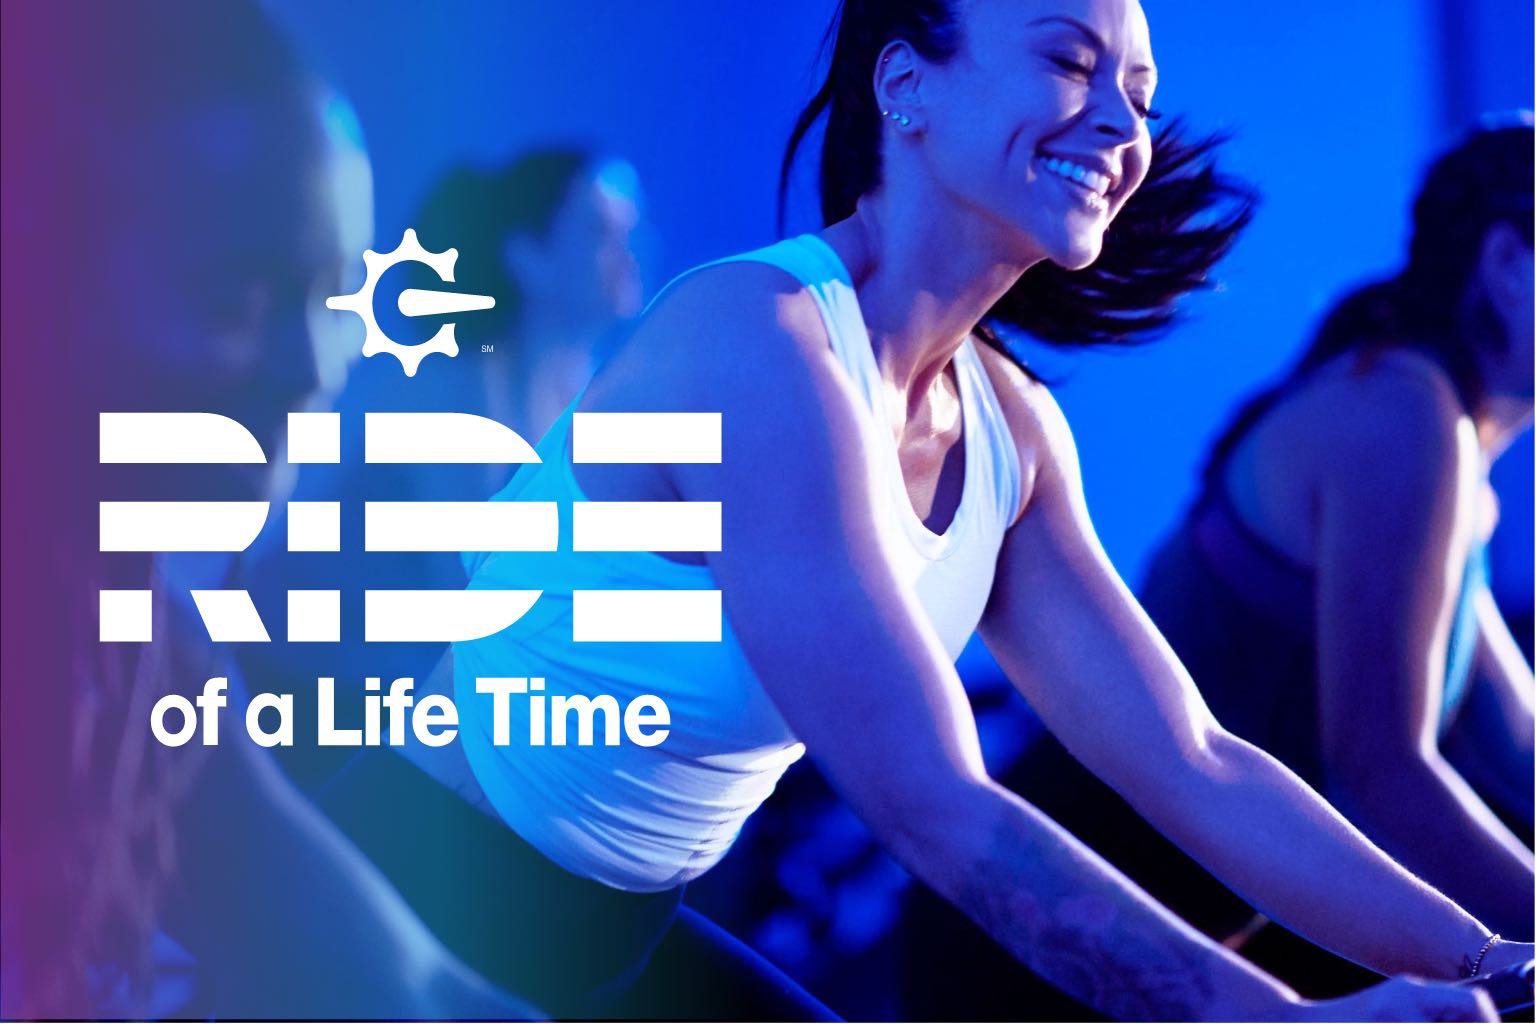 woman smiling on bike with Ride of a Life Time logo